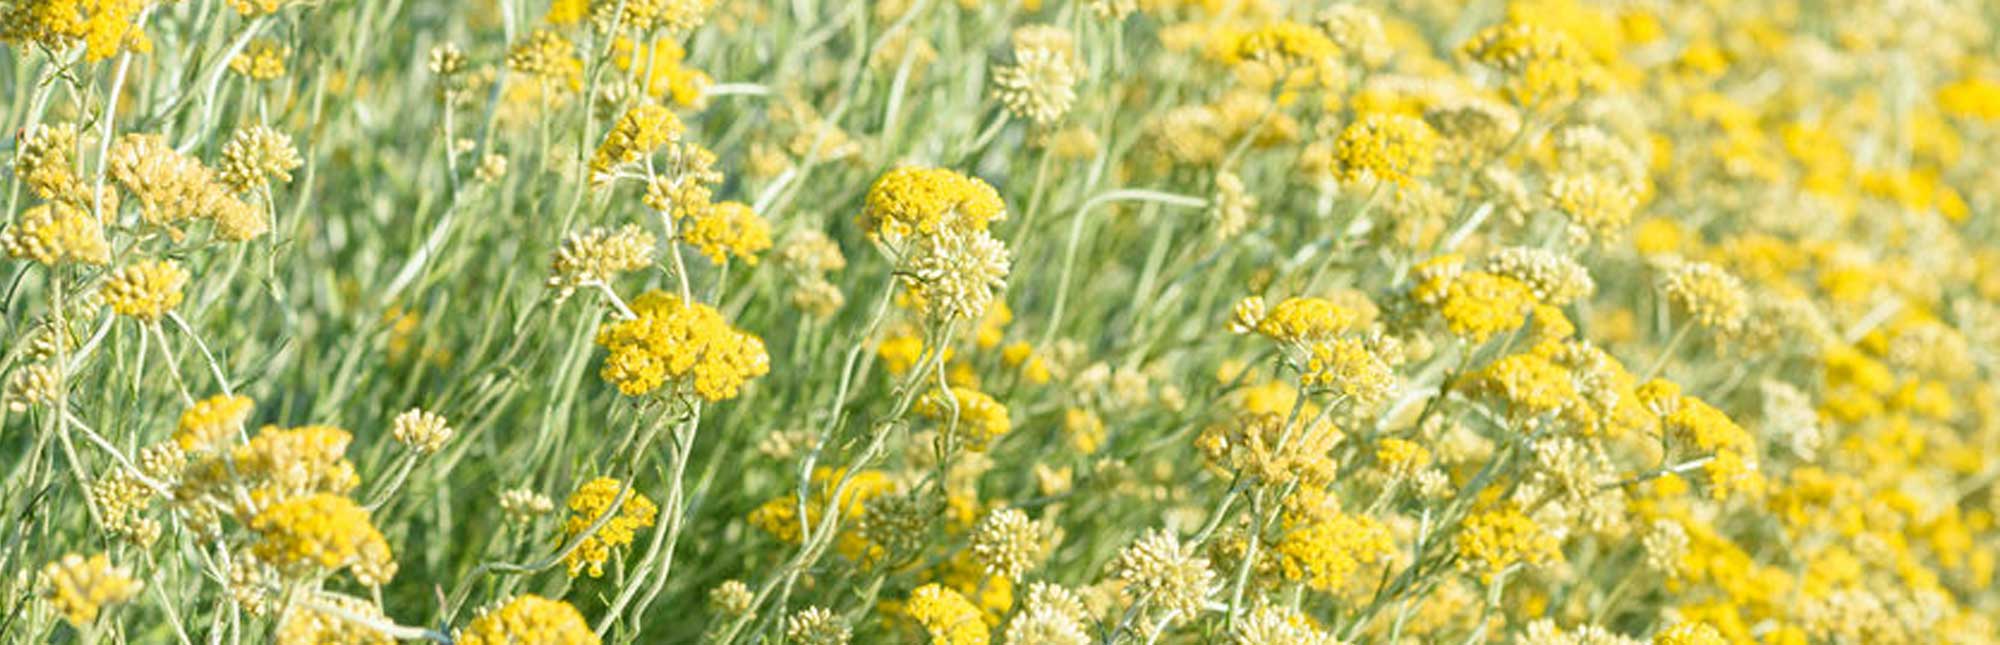 bright yellow helichrysum plants growing in a field